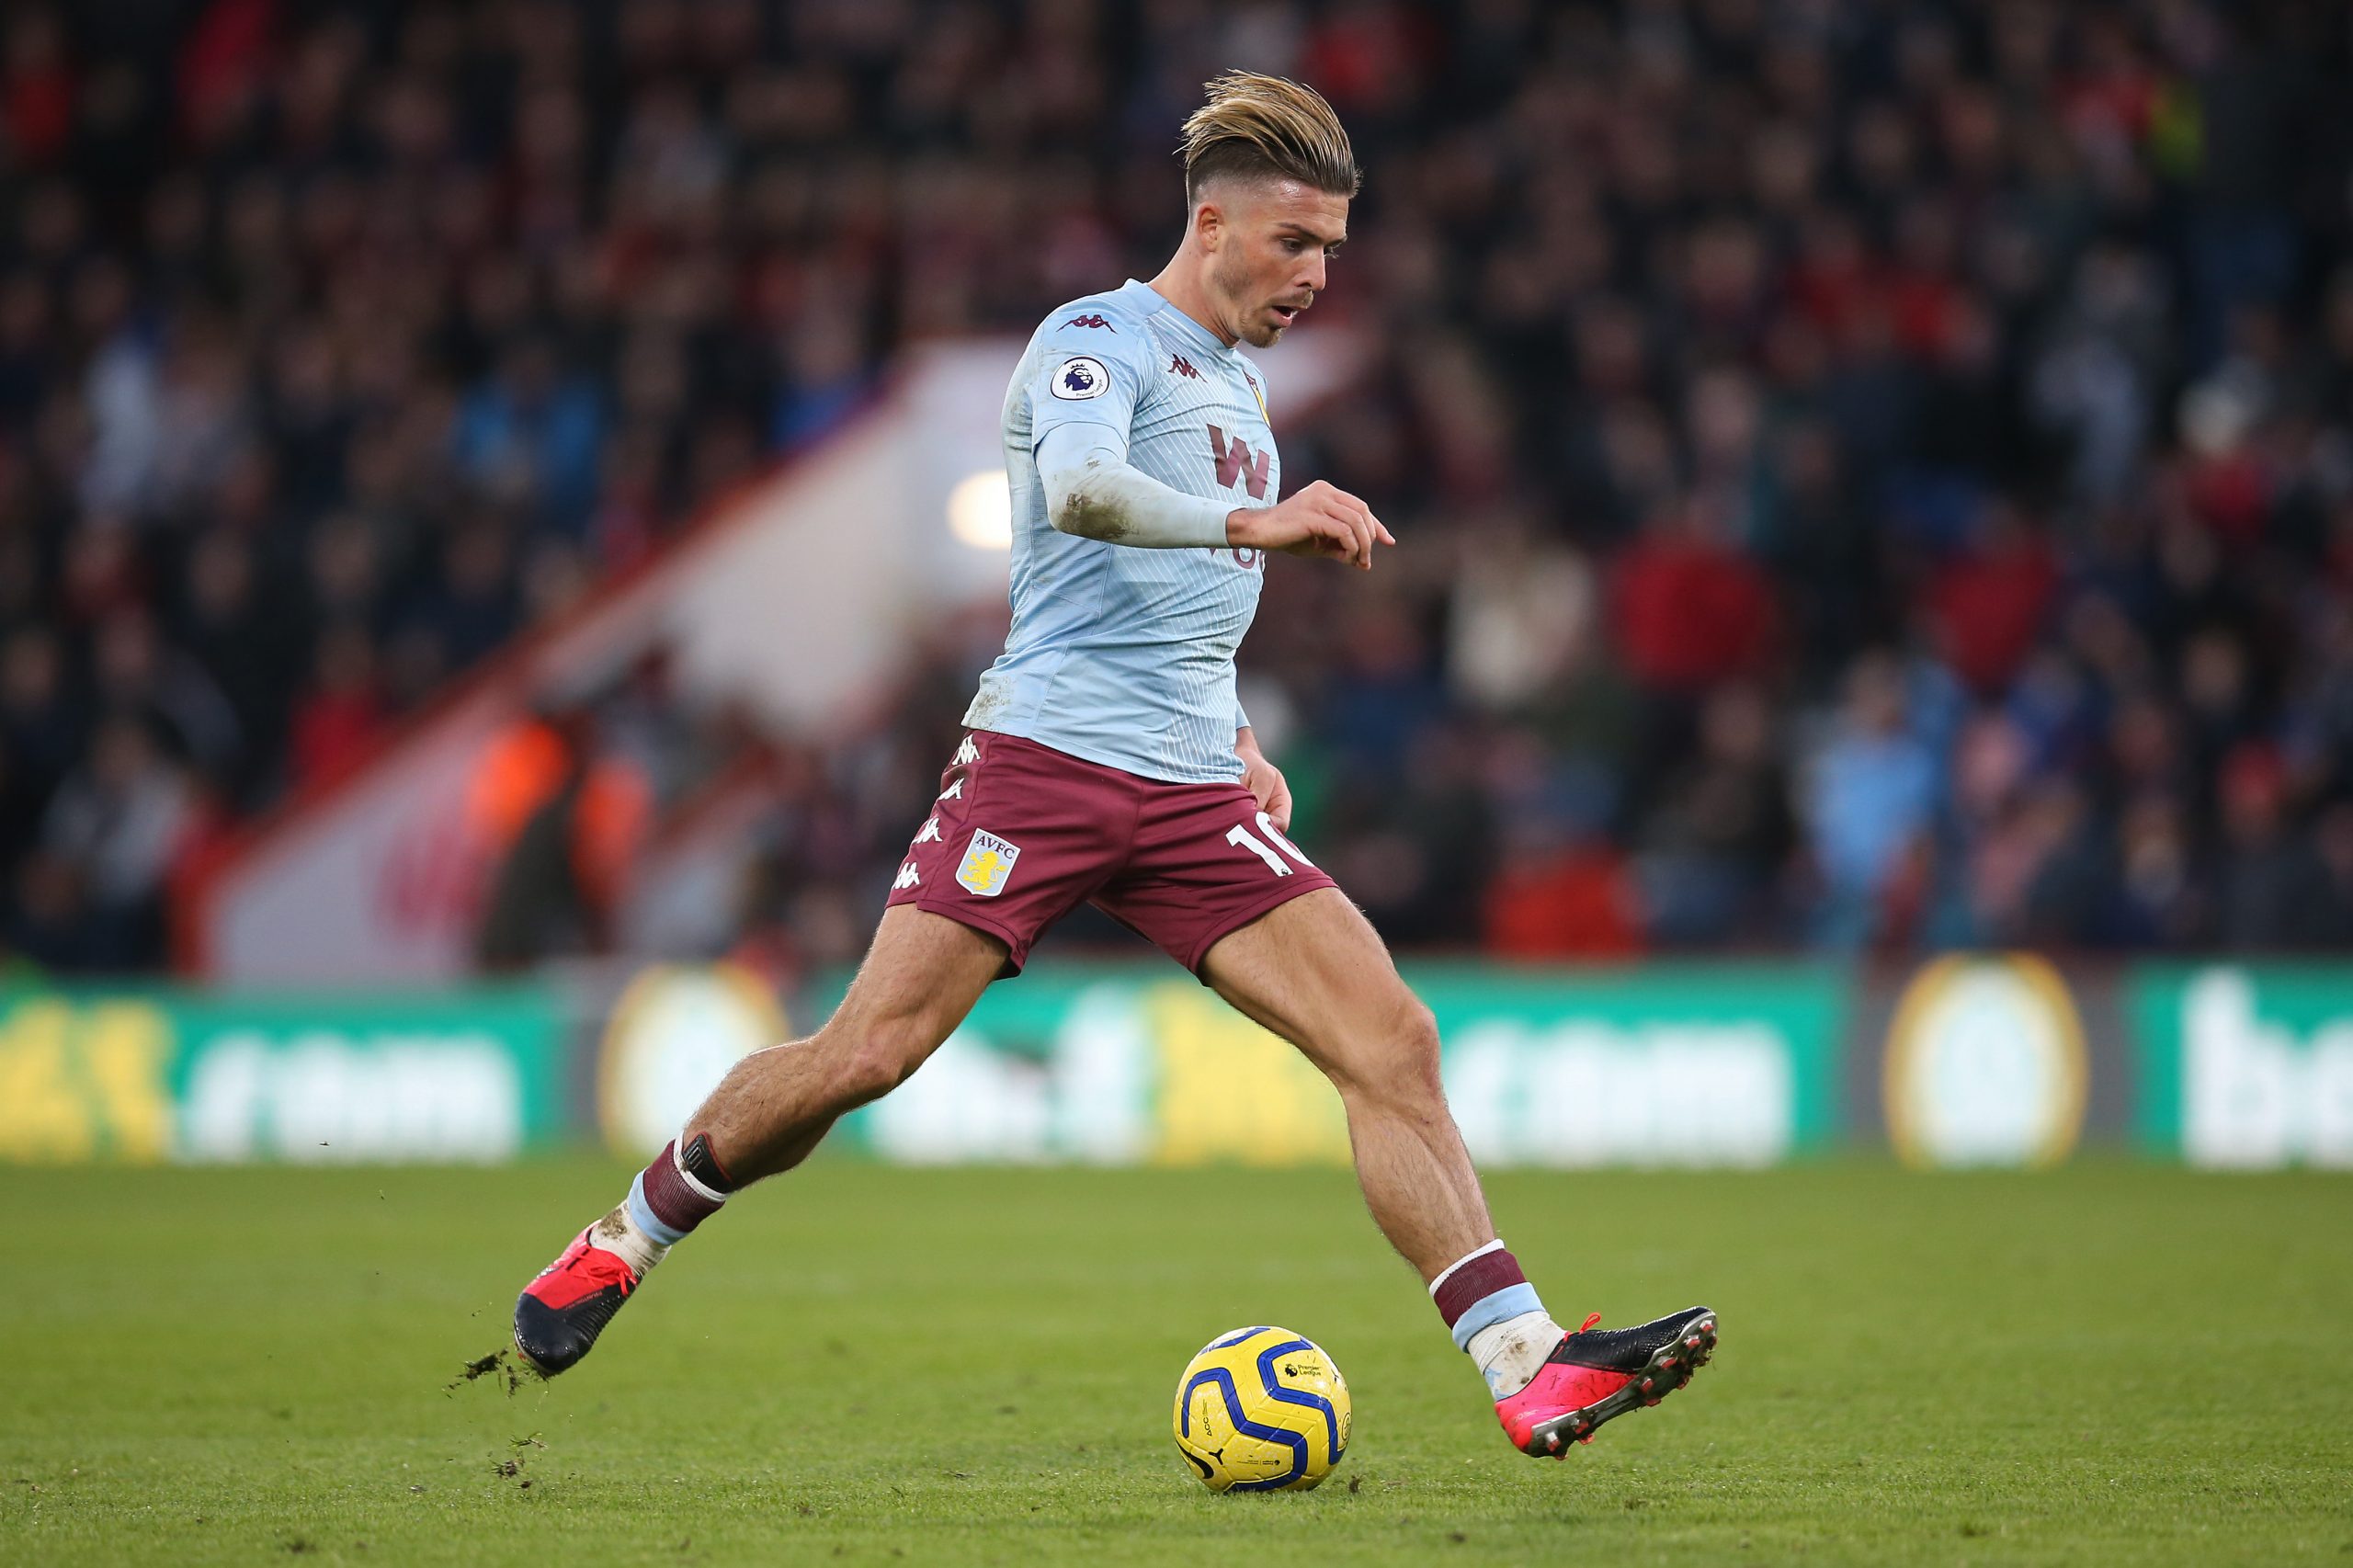 Dean Smith delivers encouraging update on Grealish's injury (Grealish is seen in the picture)